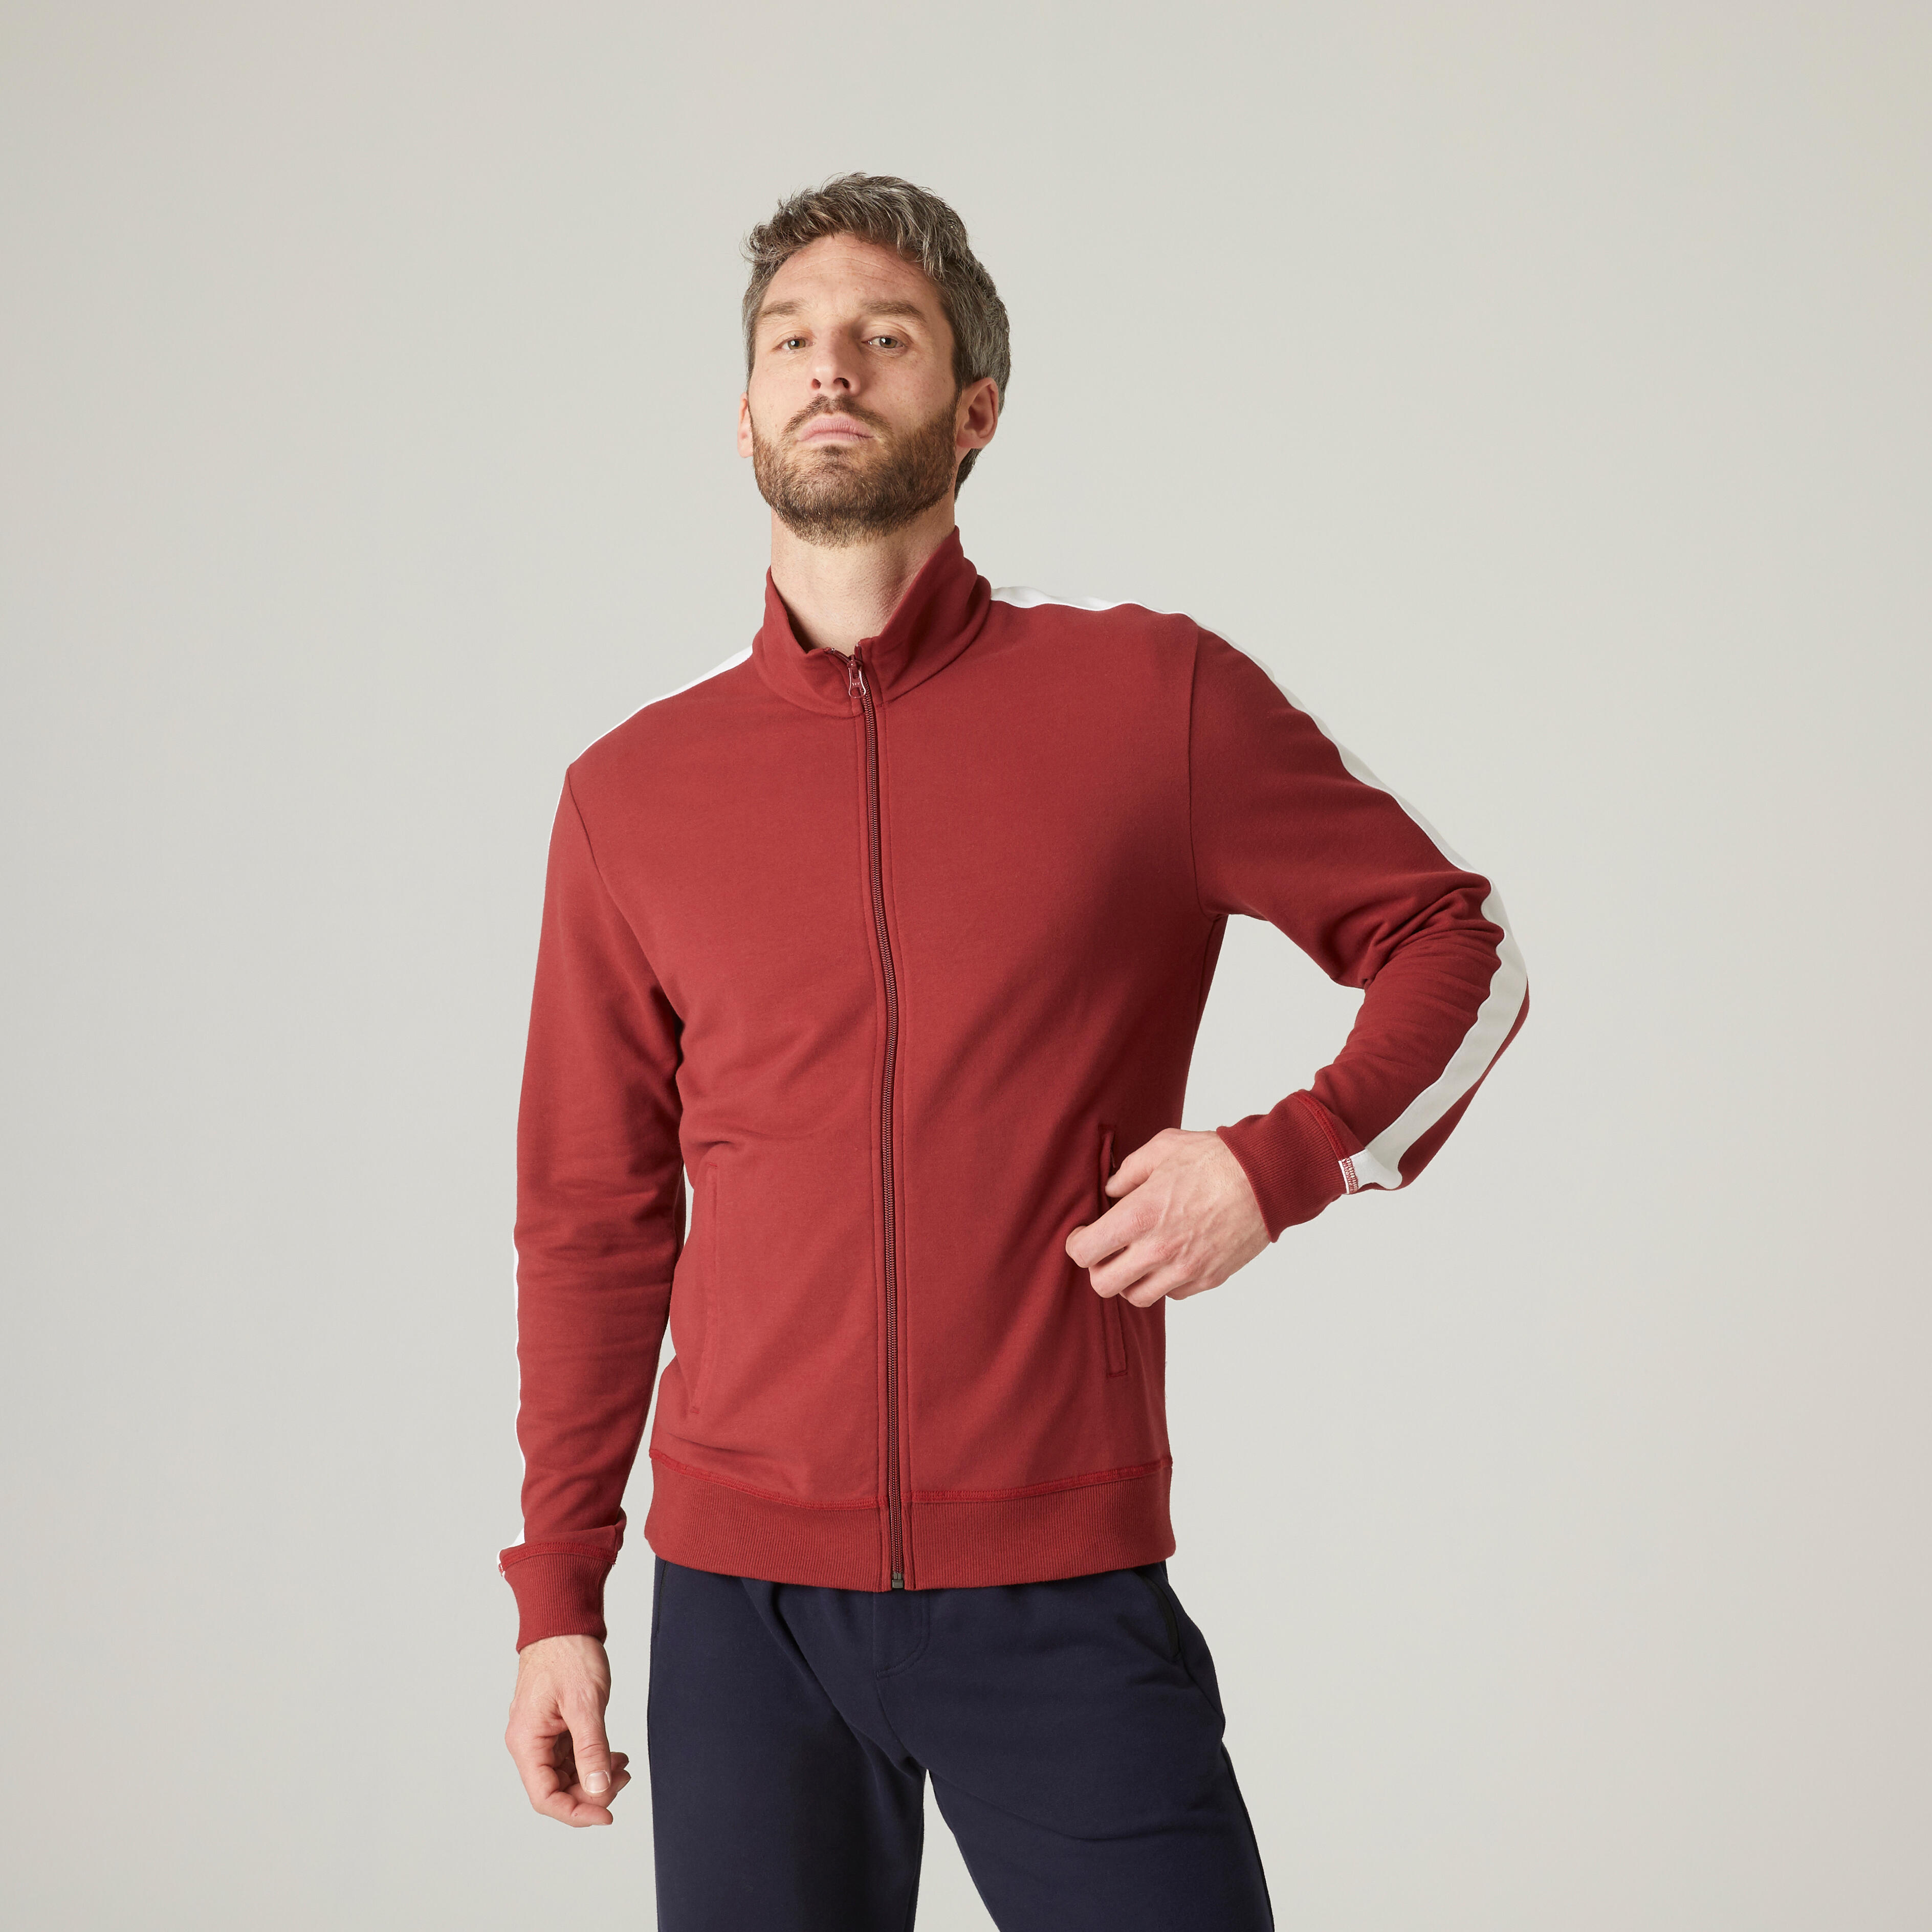 DOMYOS by Decathlon Full Sleeve Solid Women Jacket - Buy DOMYOS by Decathlon  Full Sleeve Solid Women Jacket Online at Best Prices in India | Flipkart.com